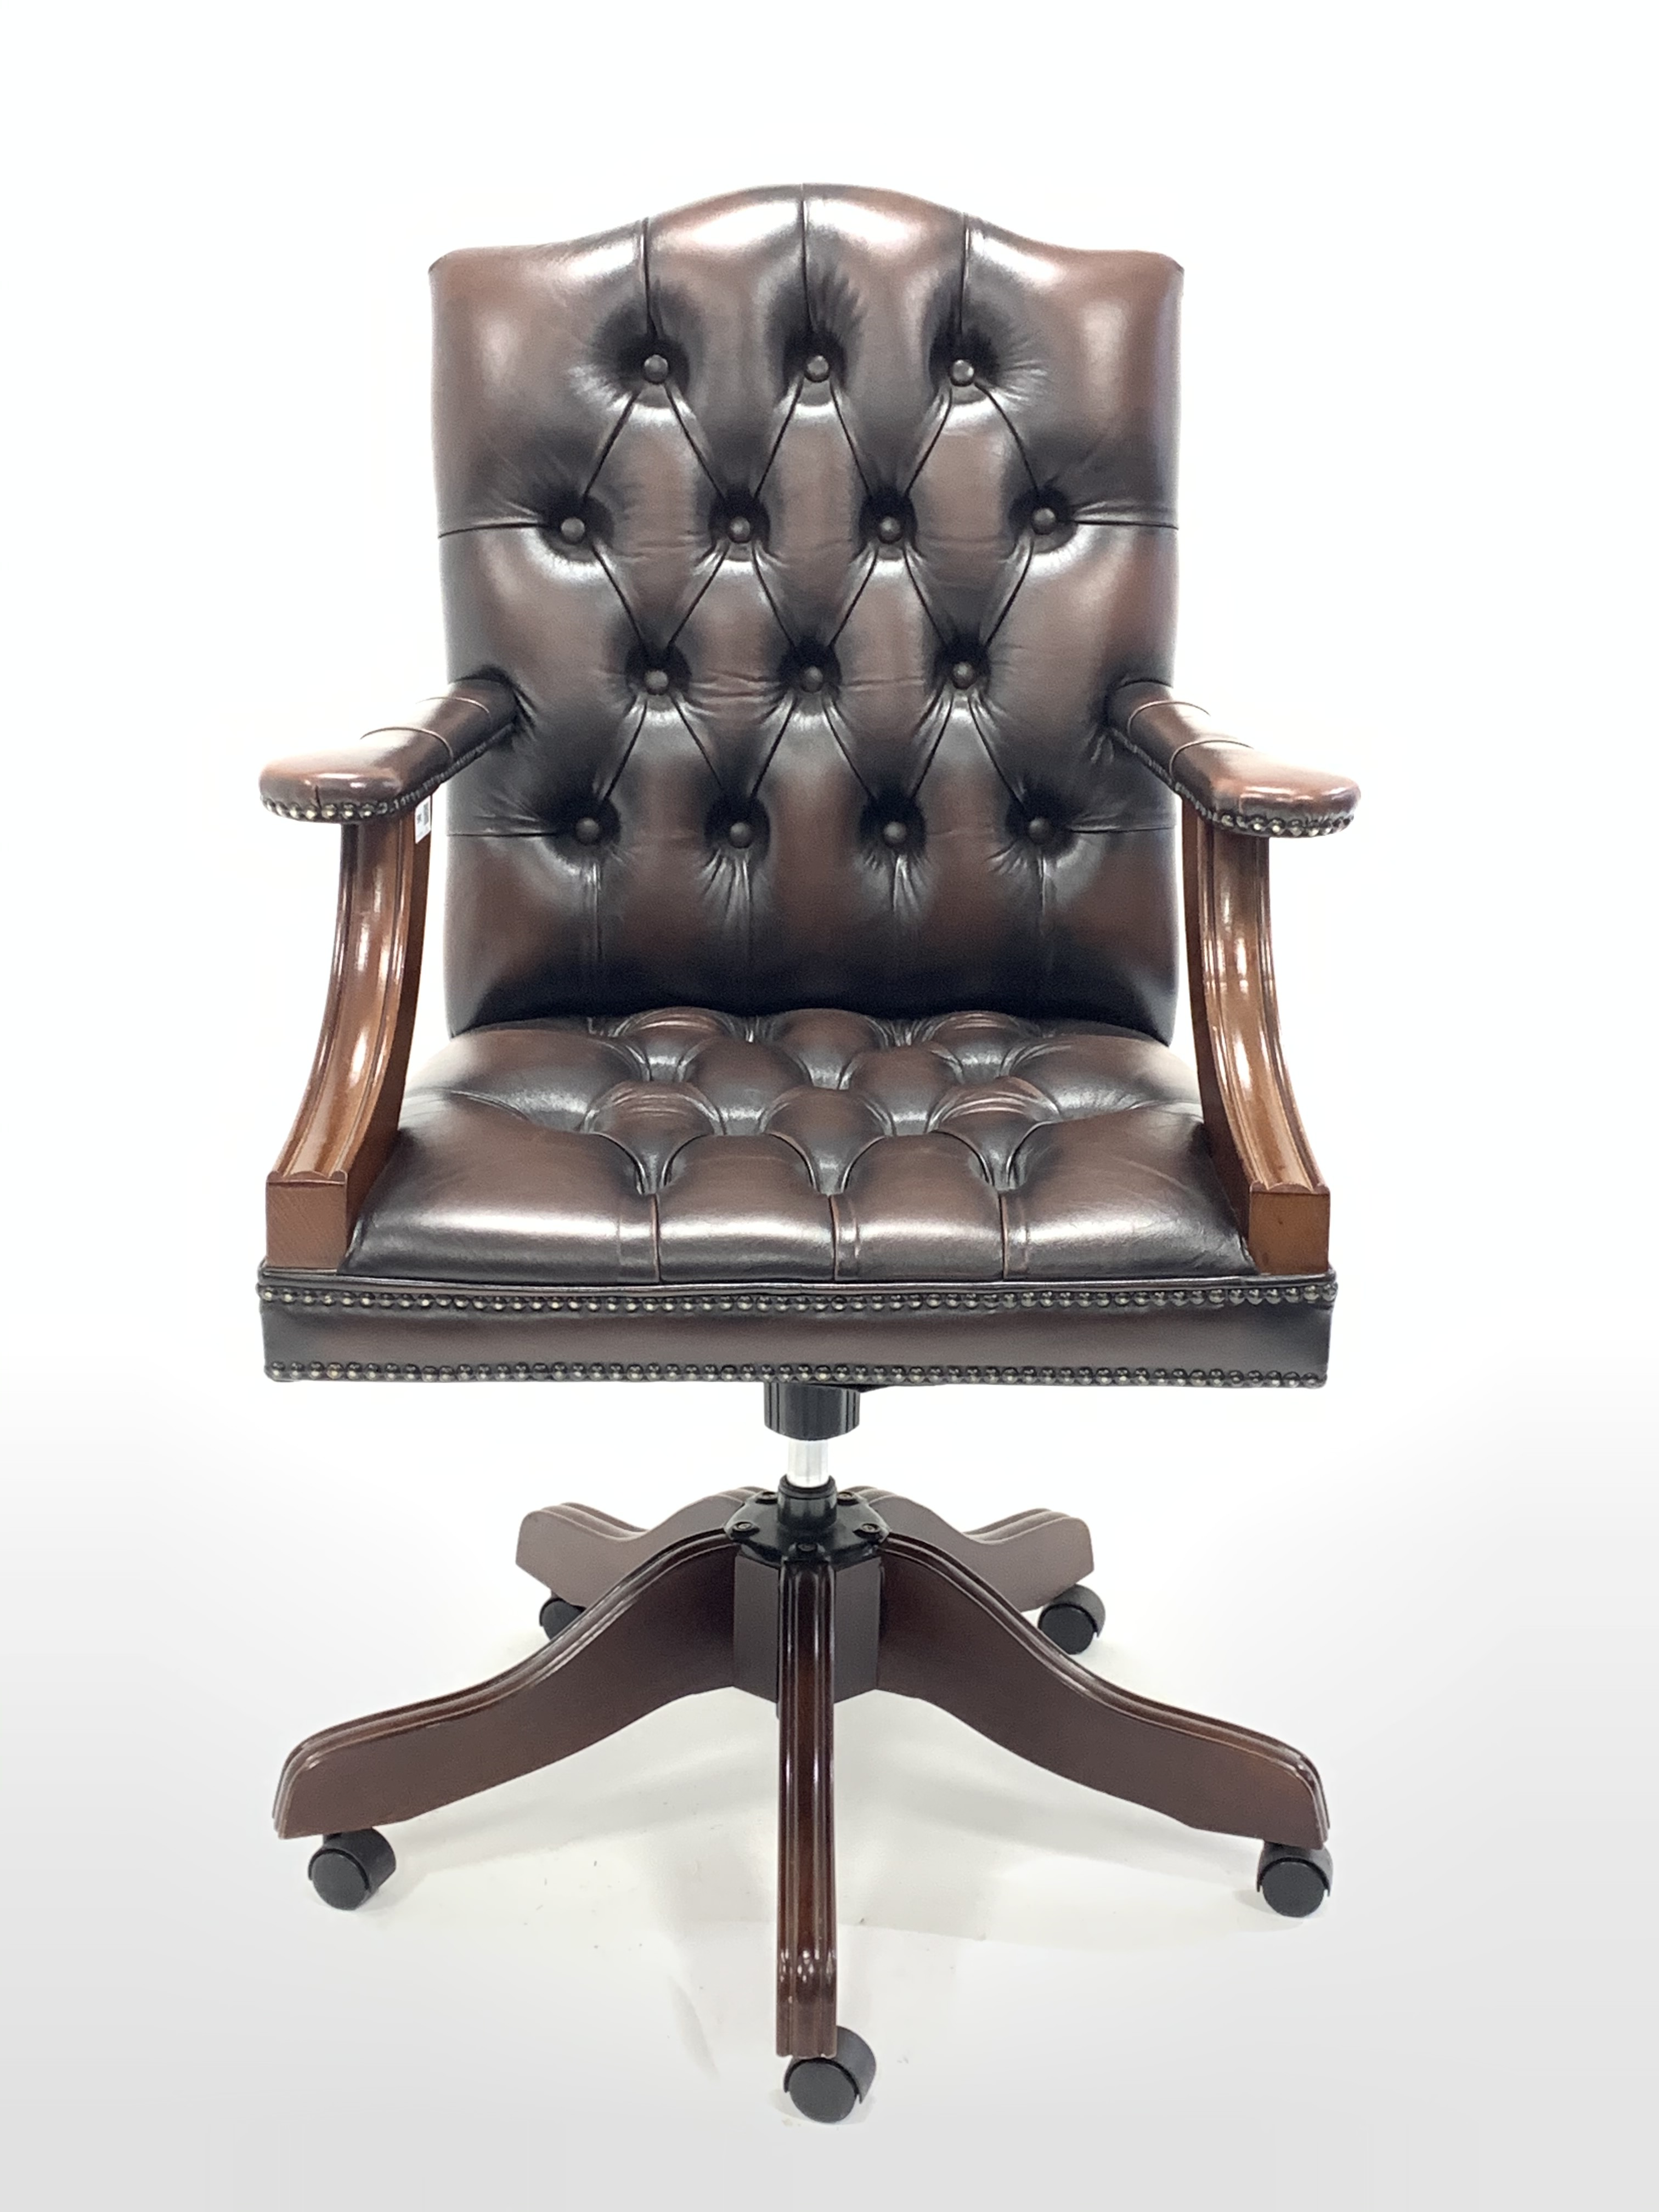 20th century captains chair, seat and back upholstered in buttoned and studded brown leather, open a - Image 3 of 3